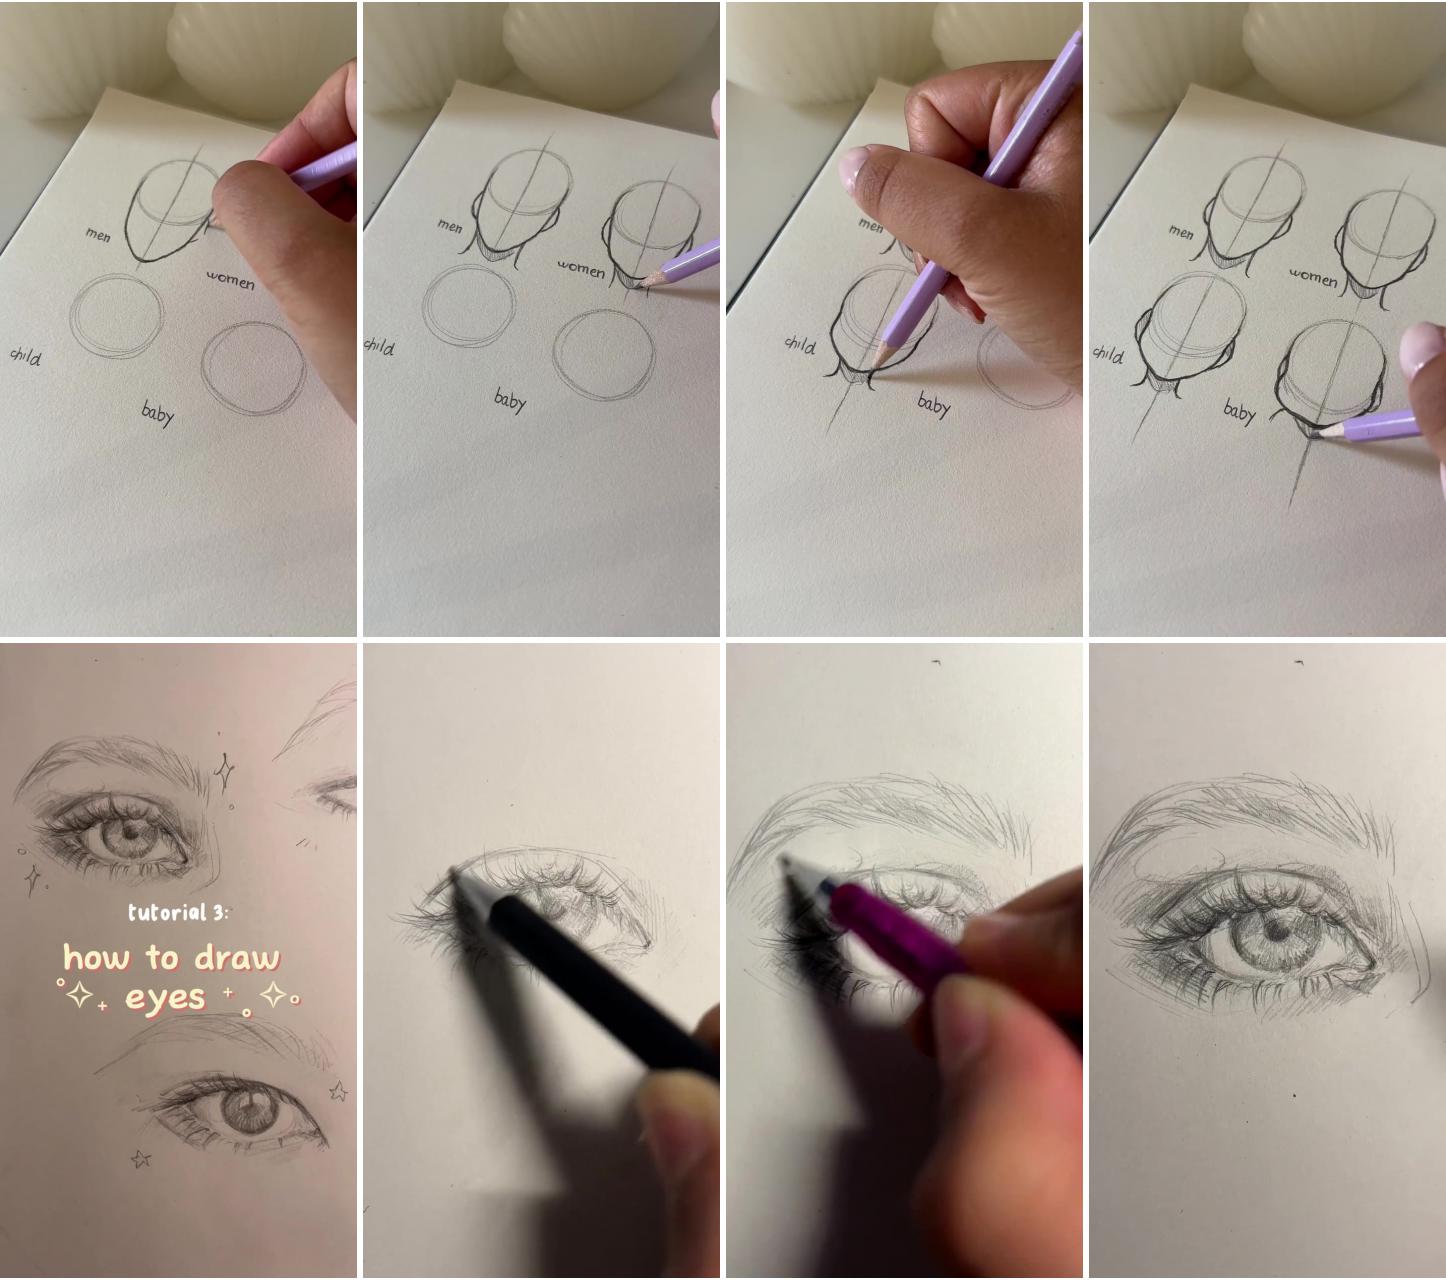 Tutorial of different faces | how to draw eyes - traditional art - eye tutorial